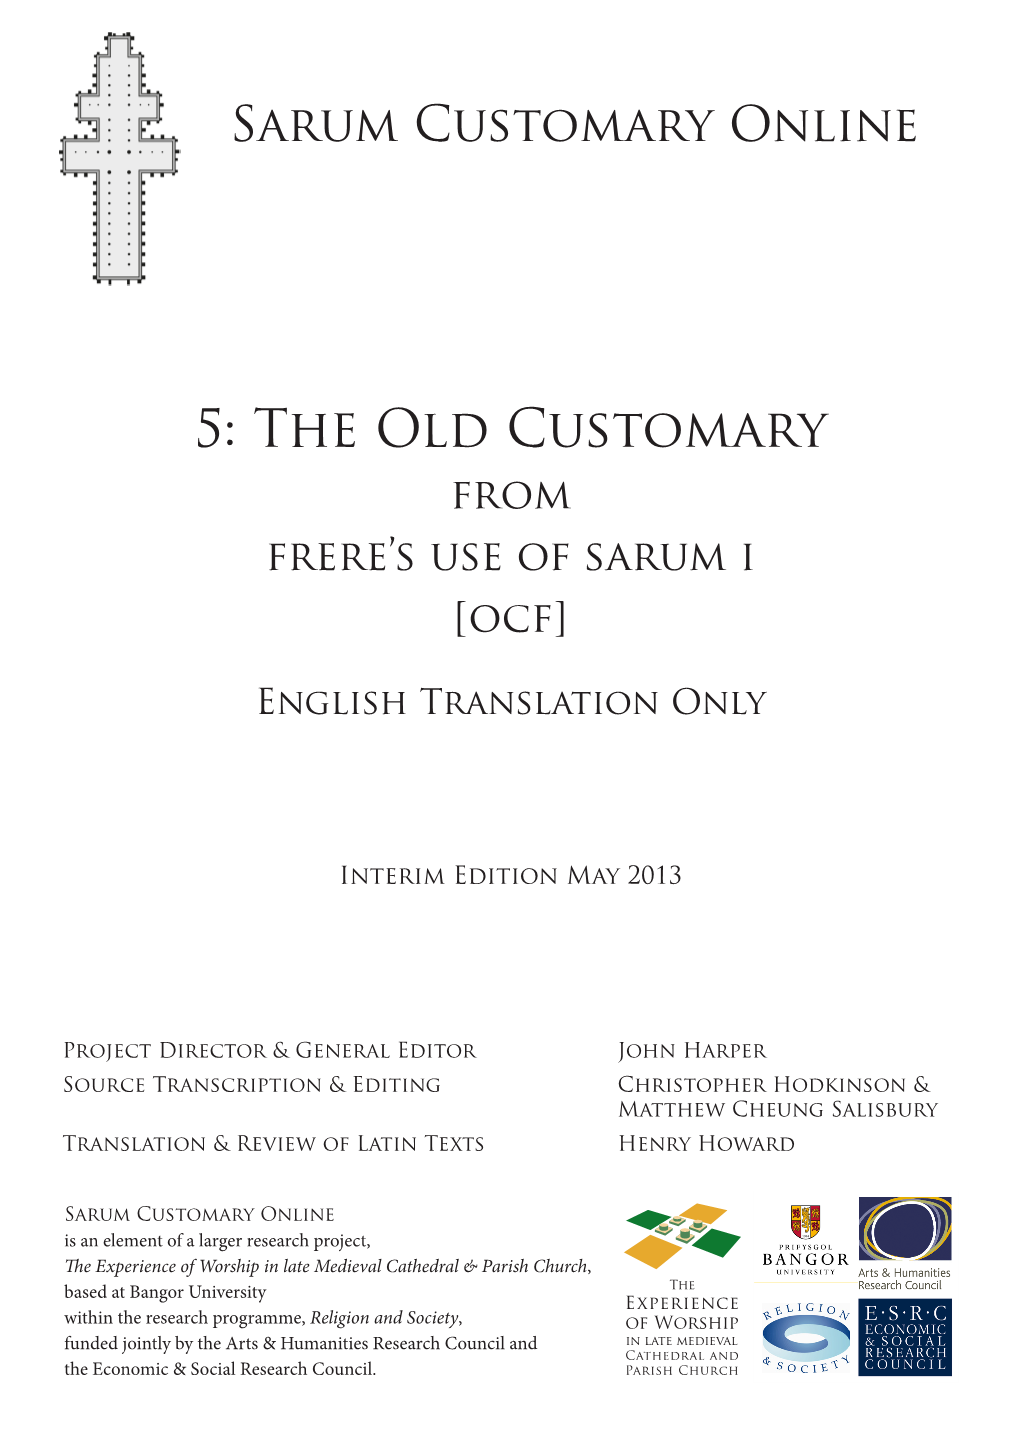 The Old Customary of Salisbury Cathedral [OCF]